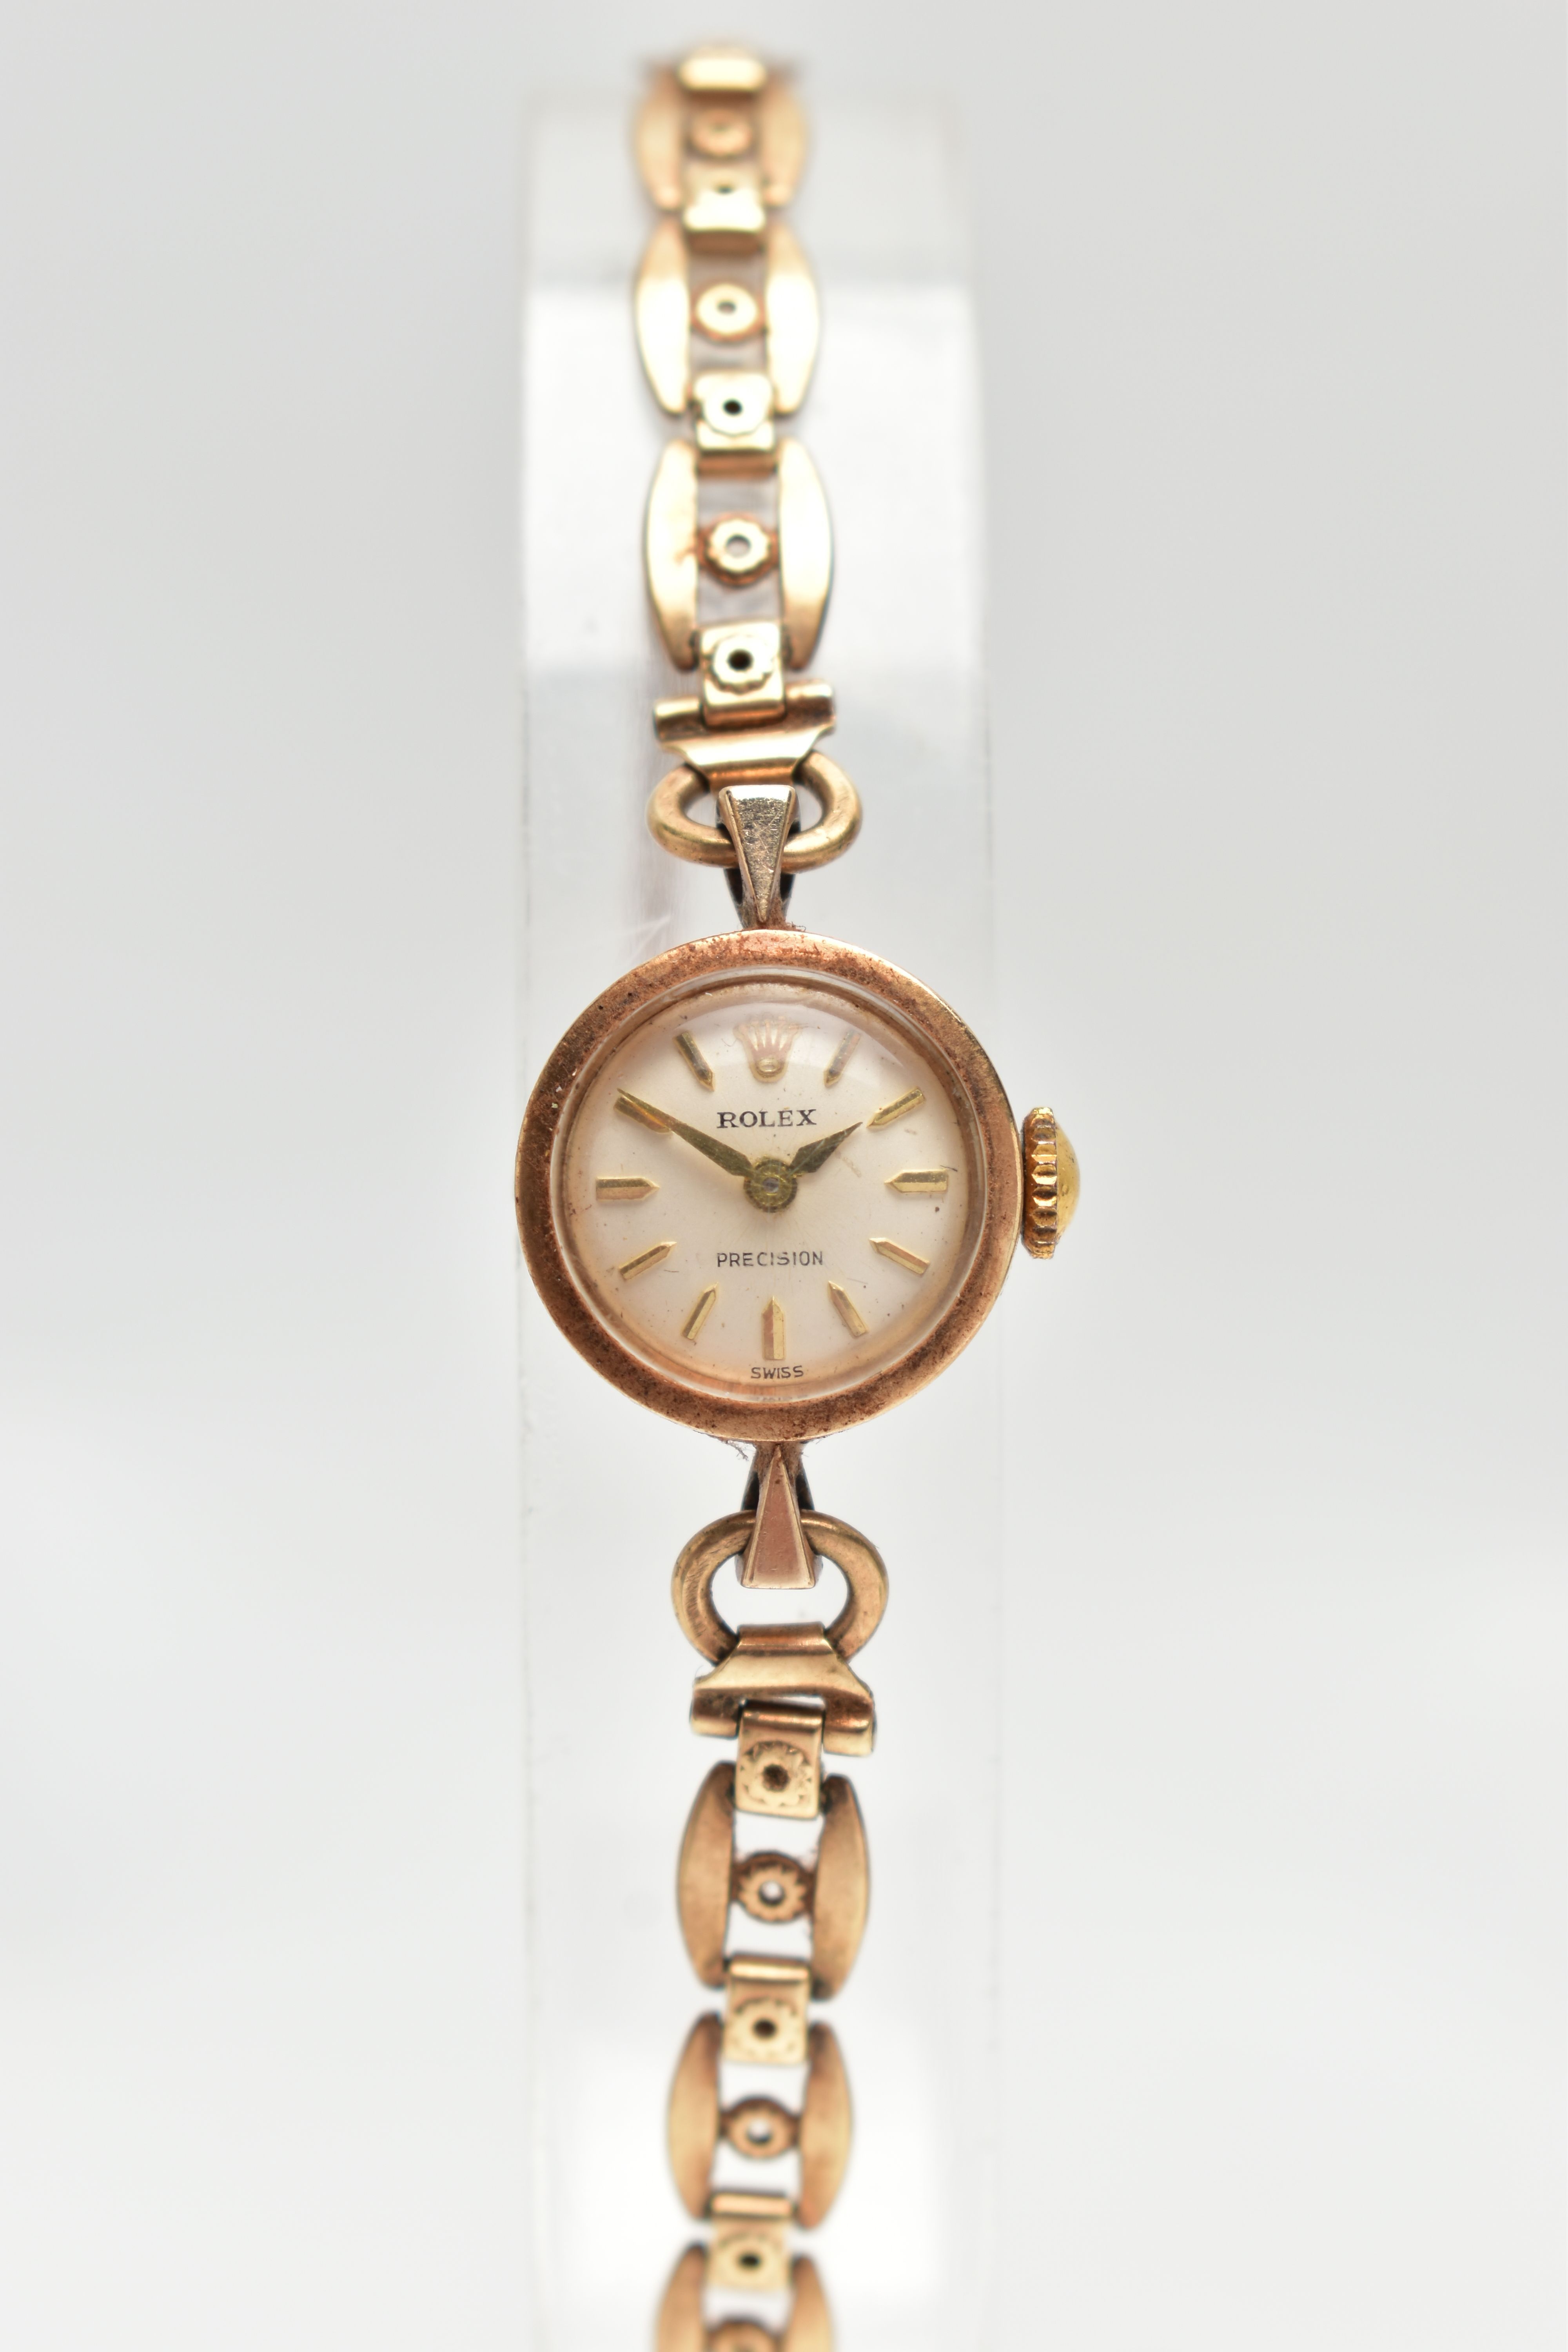 A LADIES 9CT GOLD 'ROLEX' WRISTWATCH, non-running manual wind, silver dial signed 'Rolex Precision',